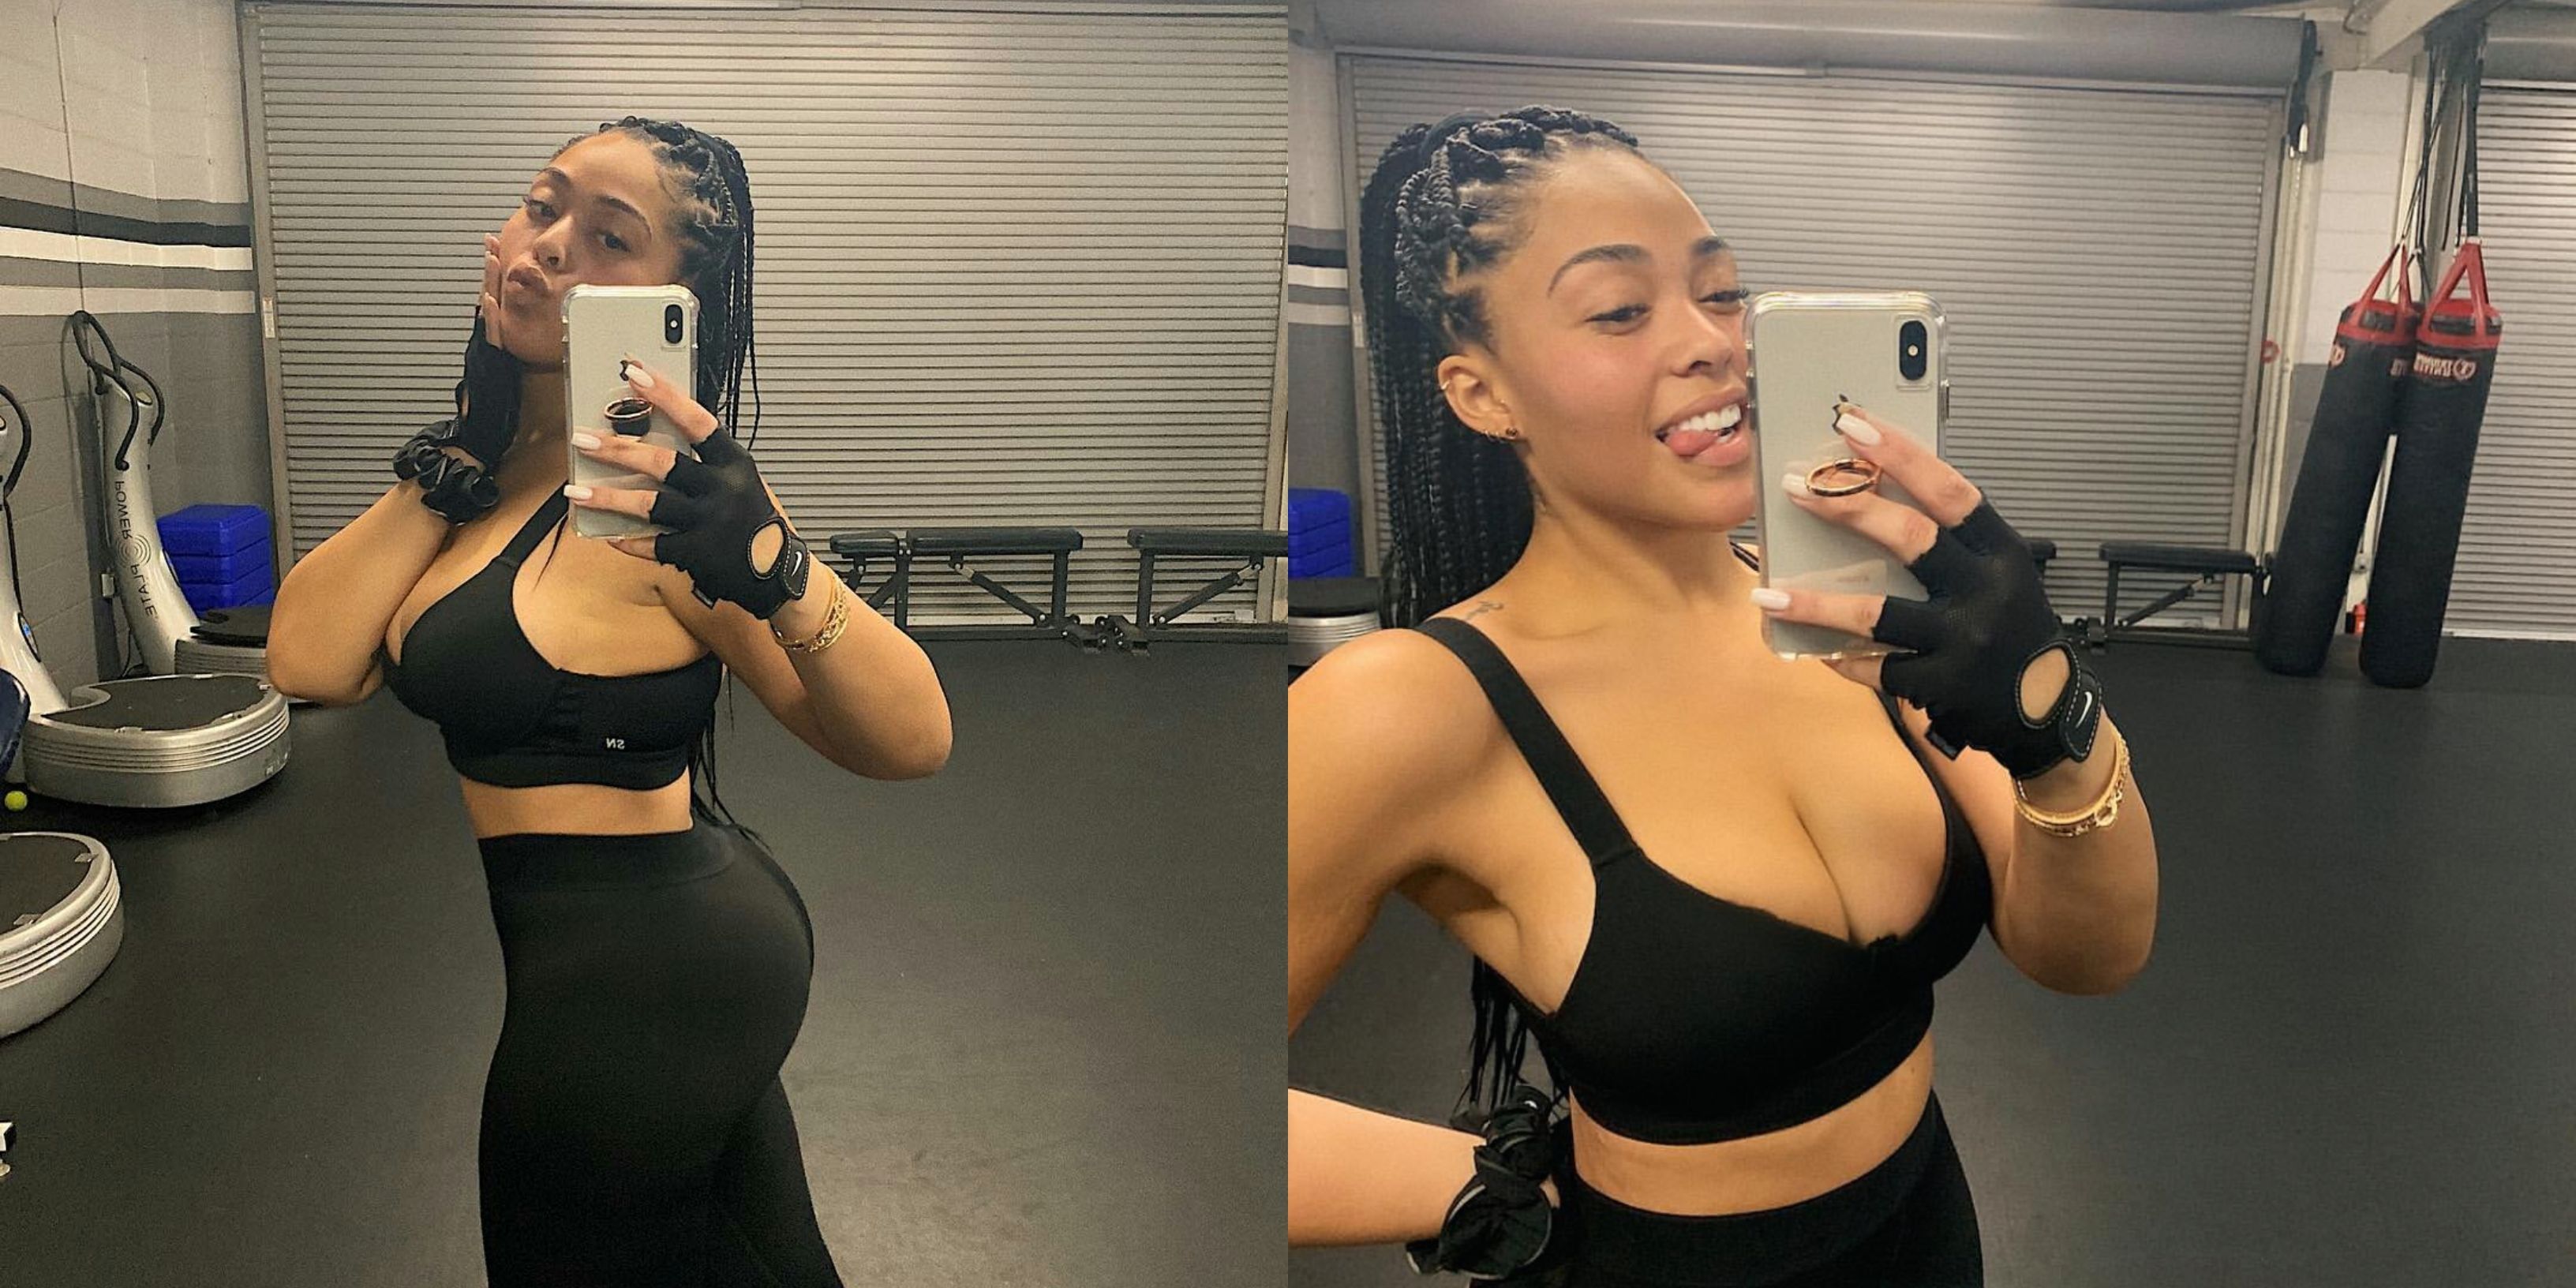 mirror pics at the gym | Gallery posted by Kaylee | Lemon8